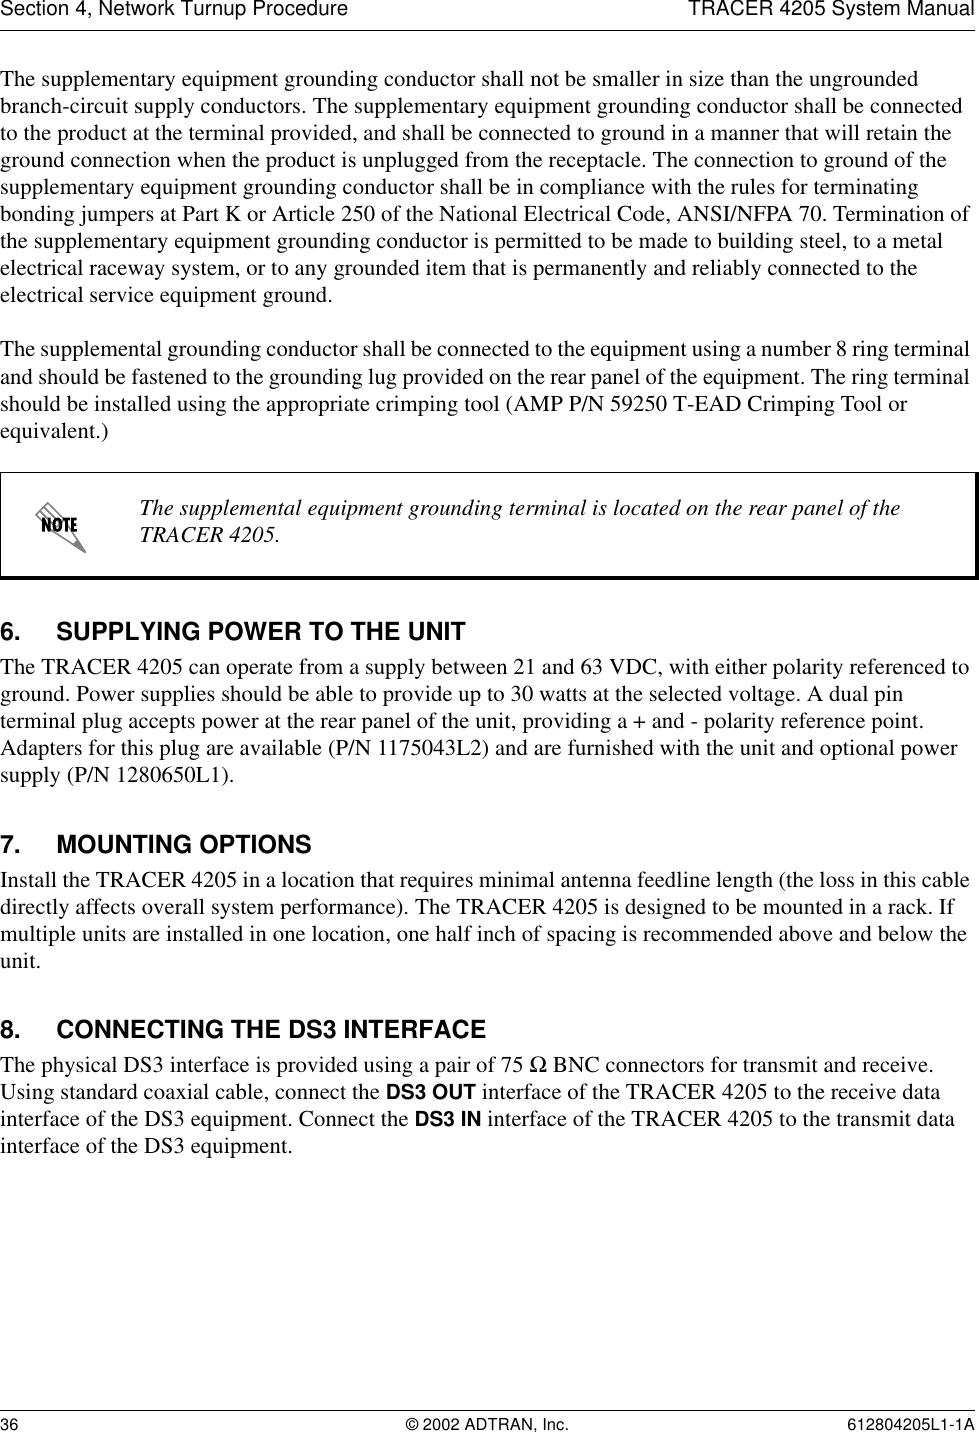 Section 4, Network Turnup Procedure TRACER 4205 System Manual36 © 2002 ADTRAN, Inc. 612804205L1-1AThe supplementary equipment grounding conductor shall not be smaller in size than the ungrounded branch-circuit supply conductors. The supplementary equipment grounding conductor shall be connected to the product at the terminal provided, and shall be connected to ground in a manner that will retain the ground connection when the product is unplugged from the receptacle. The connection to ground of the supplementary equipment grounding conductor shall be in compliance with the rules for terminating bonding jumpers at Part K or Article 250 of the National Electrical Code, ANSI/NFPA 70. Termination of the supplementary equipment grounding conductor is permitted to be made to building steel, to a metal electrical raceway system, or to any grounded item that is permanently and reliably connected to the electrical service equipment ground.The supplemental grounding conductor shall be connected to the equipment using a number 8 ring terminal and should be fastened to the grounding lug provided on the rear panel of the equipment. The ring terminal should be installed using the appropriate crimping tool (AMP P/N 59250 T-EAD Crimping Tool or equivalent.)6. SUPPLYING POWER TO THE UNITThe TRACER 4205 can operate from a supply between 21 and 63 VDC, with either polarity referenced to ground. Power supplies should be able to provide up to 30 watts at the selected voltage. A dual pin terminal plug accepts power at the rear panel of the unit, providing a + and - polarity reference point. Adapters for this plug are available (P/N 1175043L2) and are furnished with the unit and optional power supply (P/N 1280650L1).7. MOUNTING OPTIONSInstall the TRACER 4205 in a location that requires minimal antenna feedline length (the loss in this cable directly affects overall system performance). The TRACER 4205 is designed to be mounted in a rack. If multiple units are installed in one location, one half inch of spacing is recommended above and below the unit.8. CONNECTING THE DS3 INTERFACEThe physical DS3 interface is provided using a pair of 75 Ω BNC connectors for transmit and receive. Using standard coaxial cable, connect the DS3 OUT interface of the TRACER 4205 to the receive data interface of the DS3 equipment. Connect the DS3 IN interface of the TRACER 4205 to the transmit data interface of the DS3 equipment.The supplemental equipment grounding terminal is located on the rear panel of the TRACER 4205.